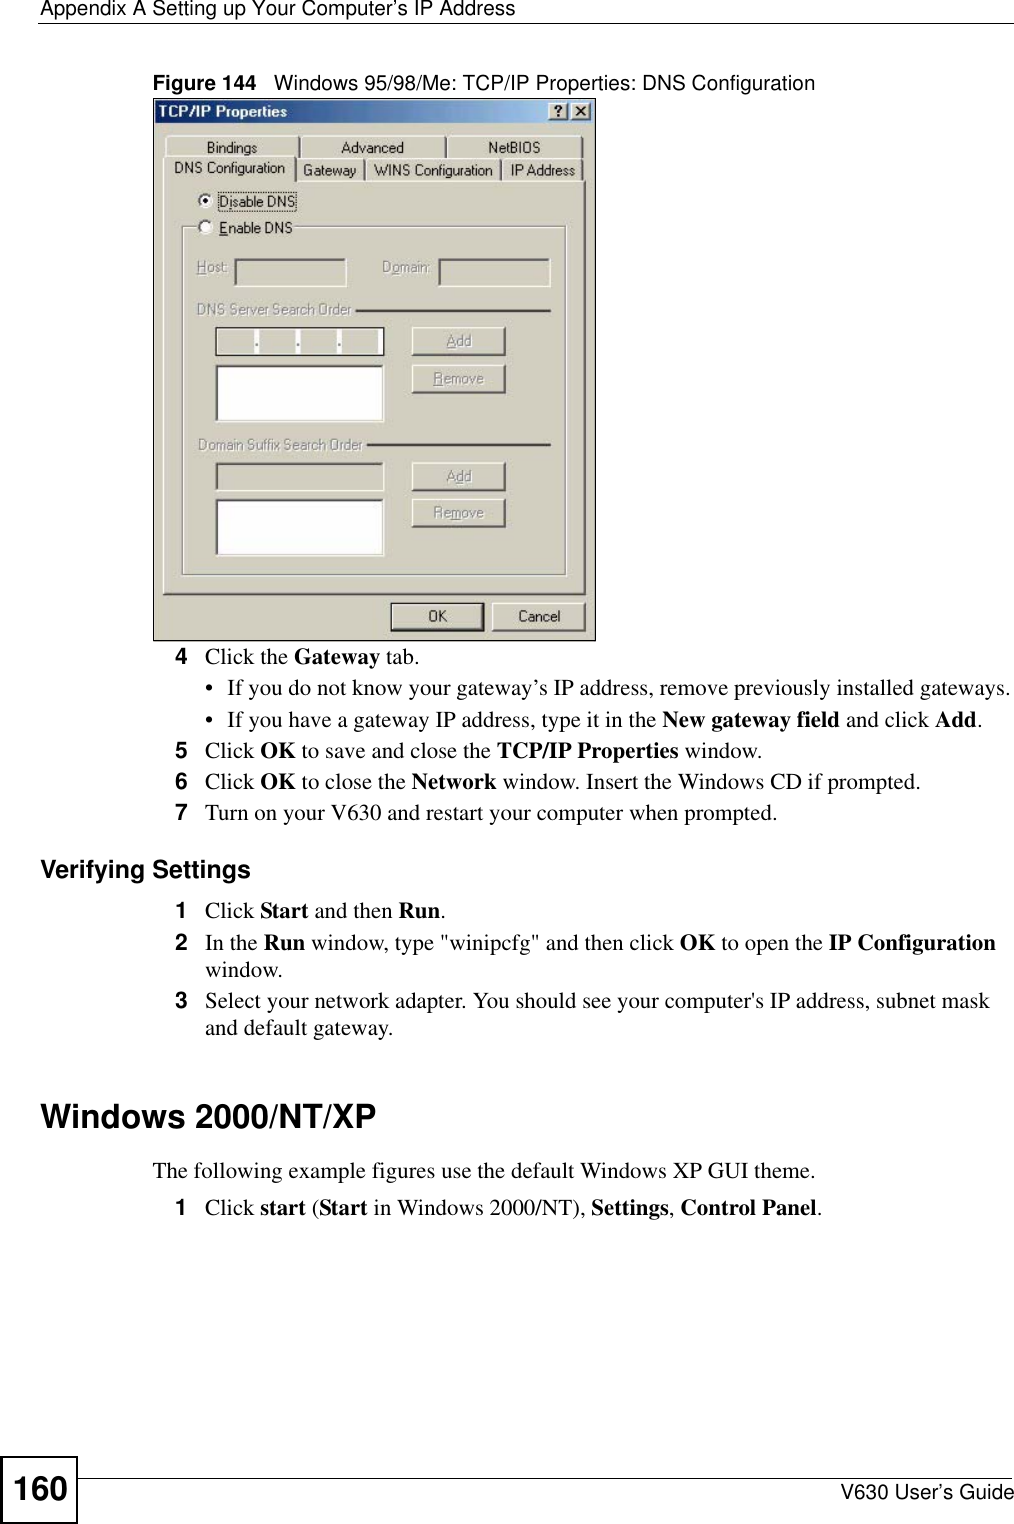 Appendix A Setting up Your Computer’s IP AddressV630 User’s Guide160Figure 144   Windows 95/98/Me: TCP/IP Properties: DNS Configuration4Click the Gateway tab.• If you do not know your gateway’s IP address, remove previously installed gateways.• If you have a gateway IP address, type it in the New gateway field and click Add.5Click OK to save and close the TCP/IP Properties window.6Click OK to close the Network window. Insert the Windows CD if prompted.7Turn on your V630 and restart your computer when prompted.Verifying Settings1Click Start and then Run.2In the Run window, type &quot;winipcfg&quot; and then click OK to open the IP Configuration window.3Select your network adapter. You should see your computer&apos;s IP address, subnet mask and default gateway.Windows 2000/NT/XPThe following example figures use the default Windows XP GUI theme.1Click start (Start in Windows 2000/NT), Settings, Control Panel.